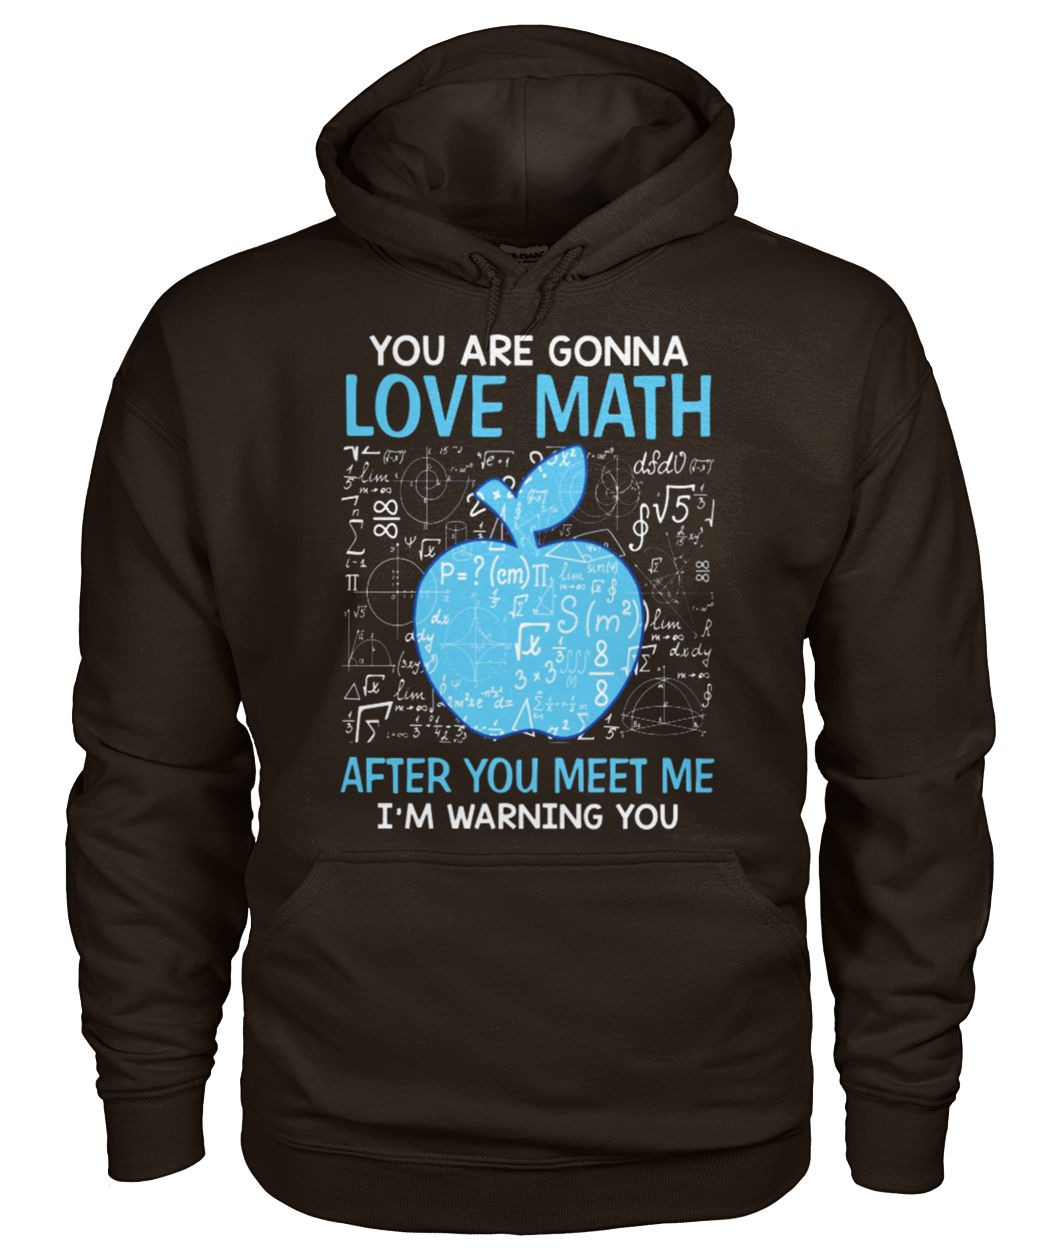 You are gonna love math after you meet me I'm warning you gildan hoodie